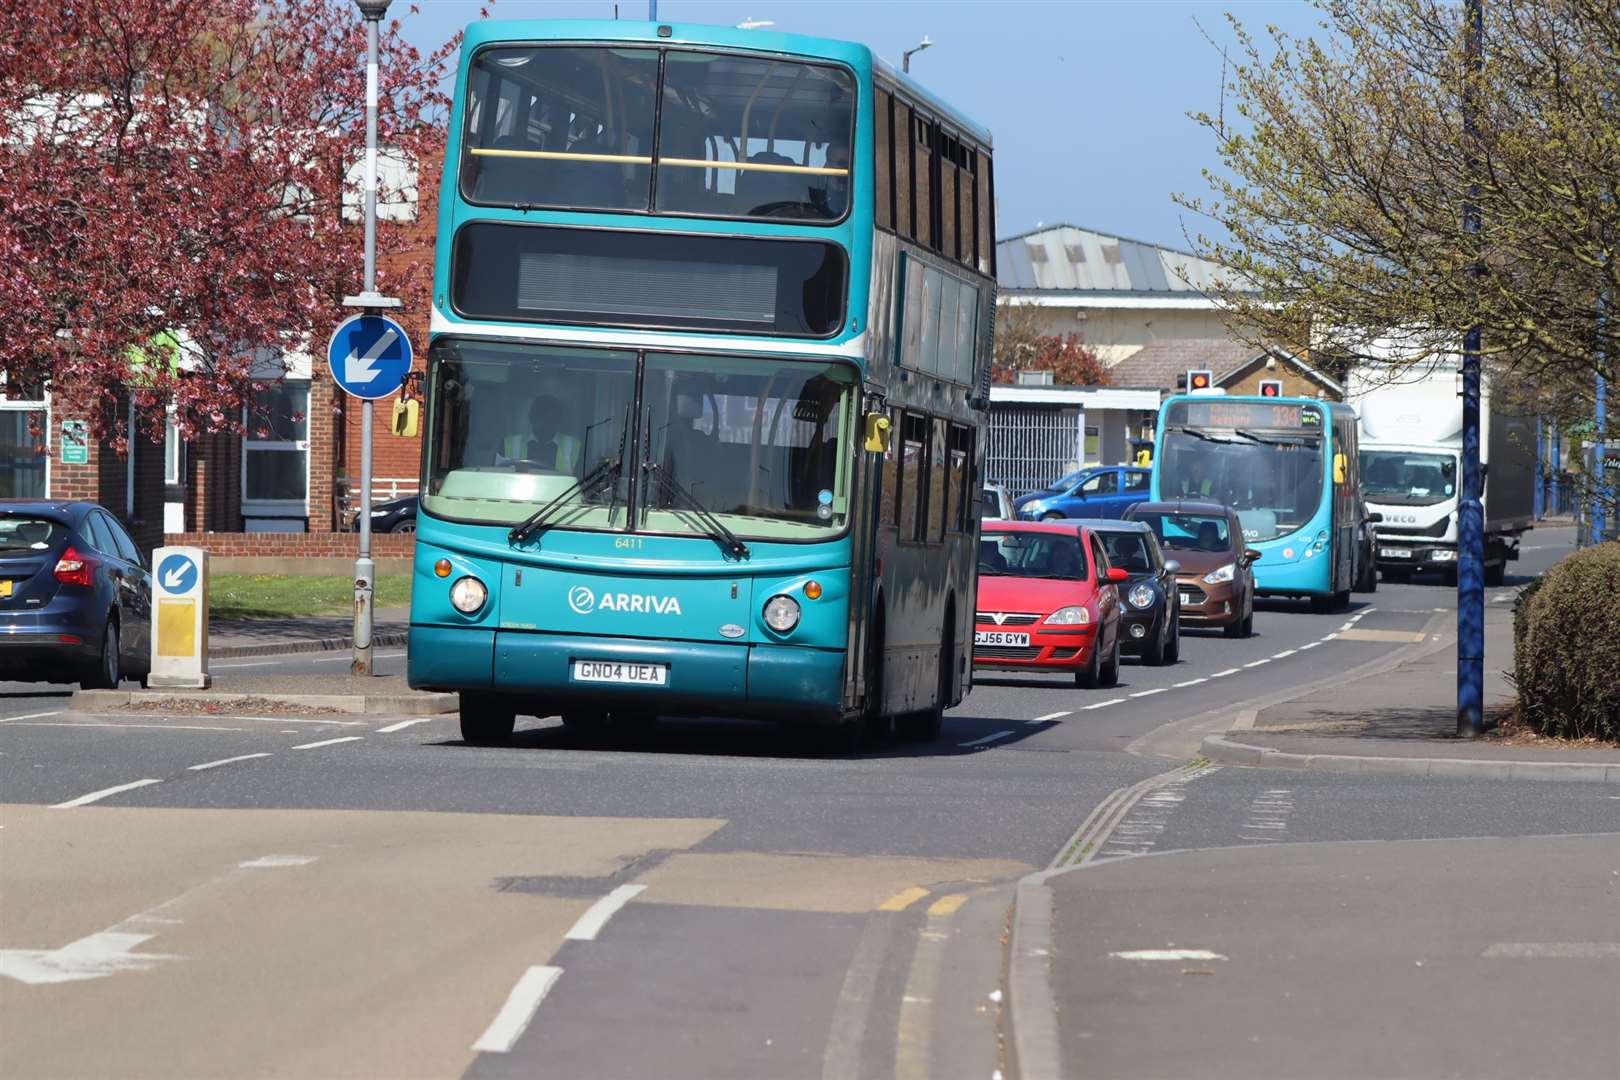 A decision has not yet been reached after a heated debate on the bus cuts